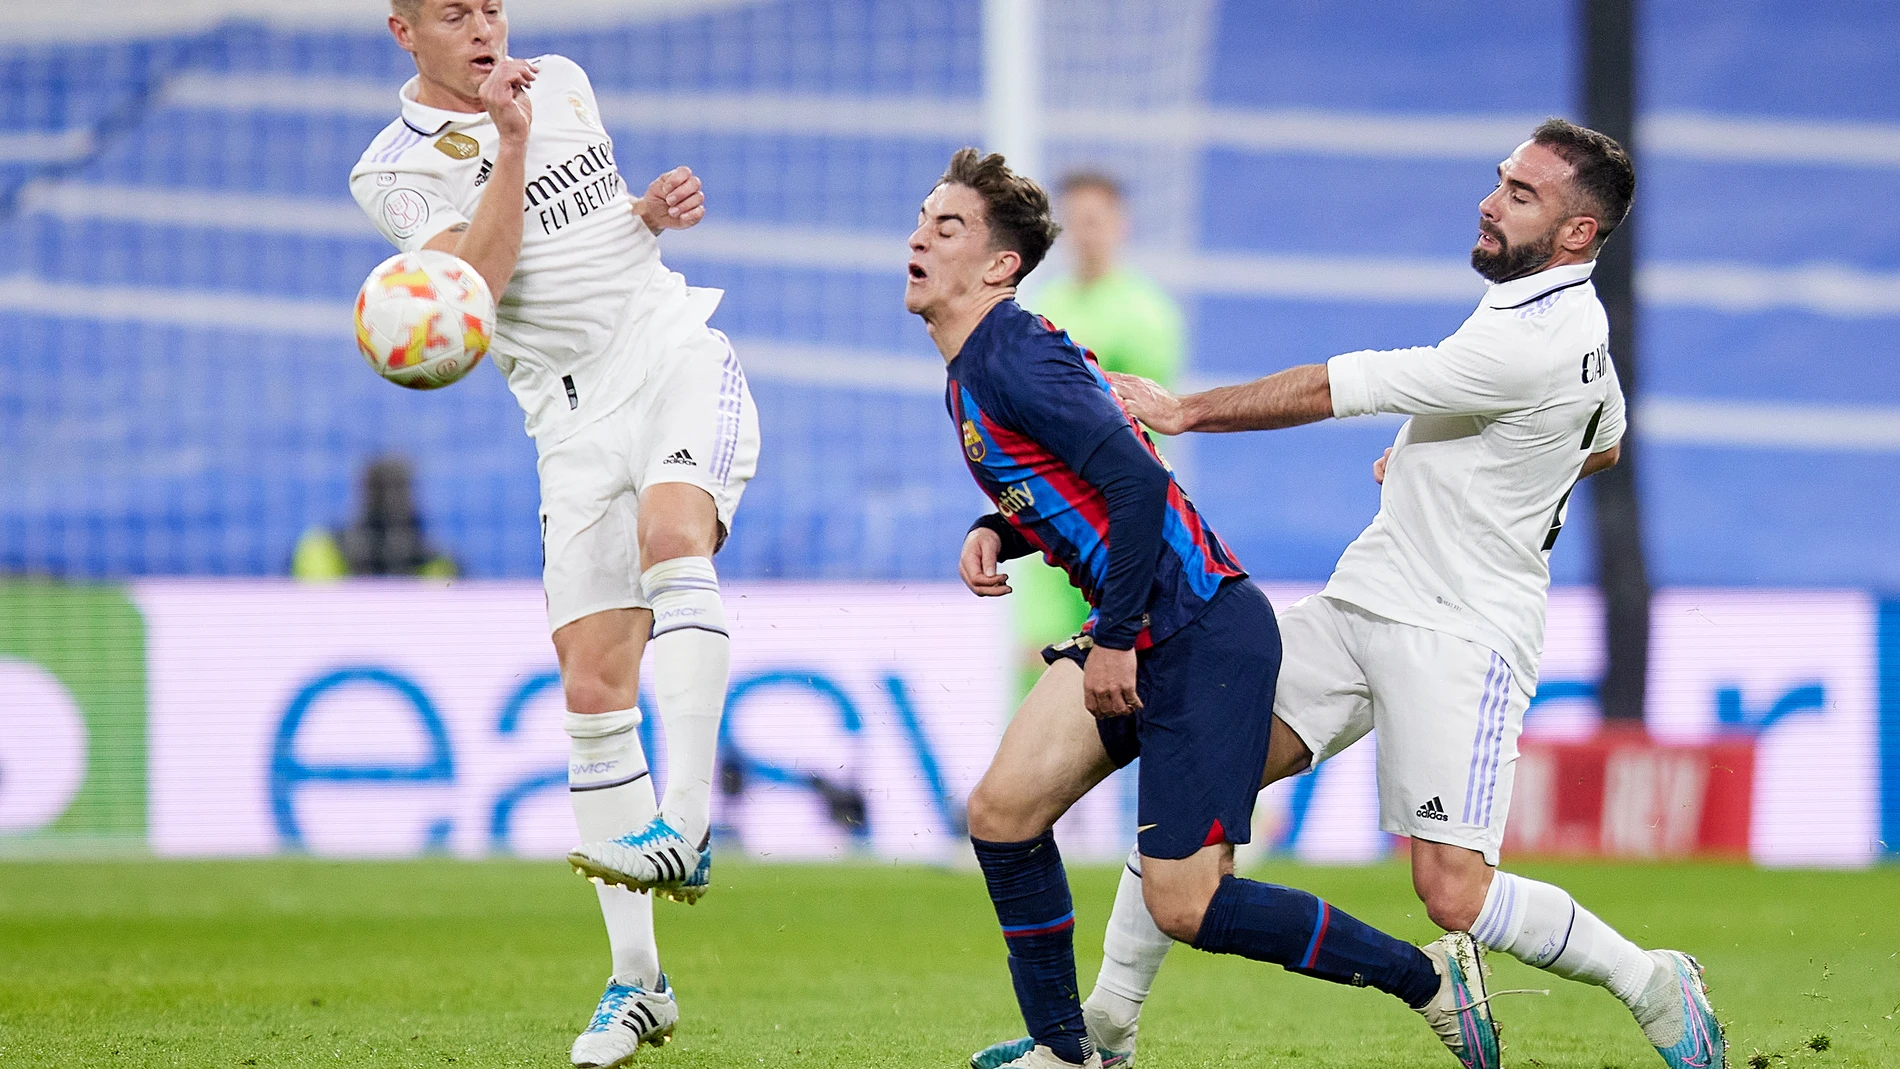 02 March 2023, Spain, Madrid: Barcelona's Gavi in action with Real Madrid's Daniel Carvajal and Toni Kroos during the Spanish Copa del Rey (King's Cup) semifinal match between Real Madrid and Barcelona at the Santiago Bernabeu Stadium. Photo: Ruben Albarran/ZUMA Press Wire/dpaRuben Albarran/ZUMA Press Wire/d / DPA02/03/2023 ONLY FOR USE IN SPAIN